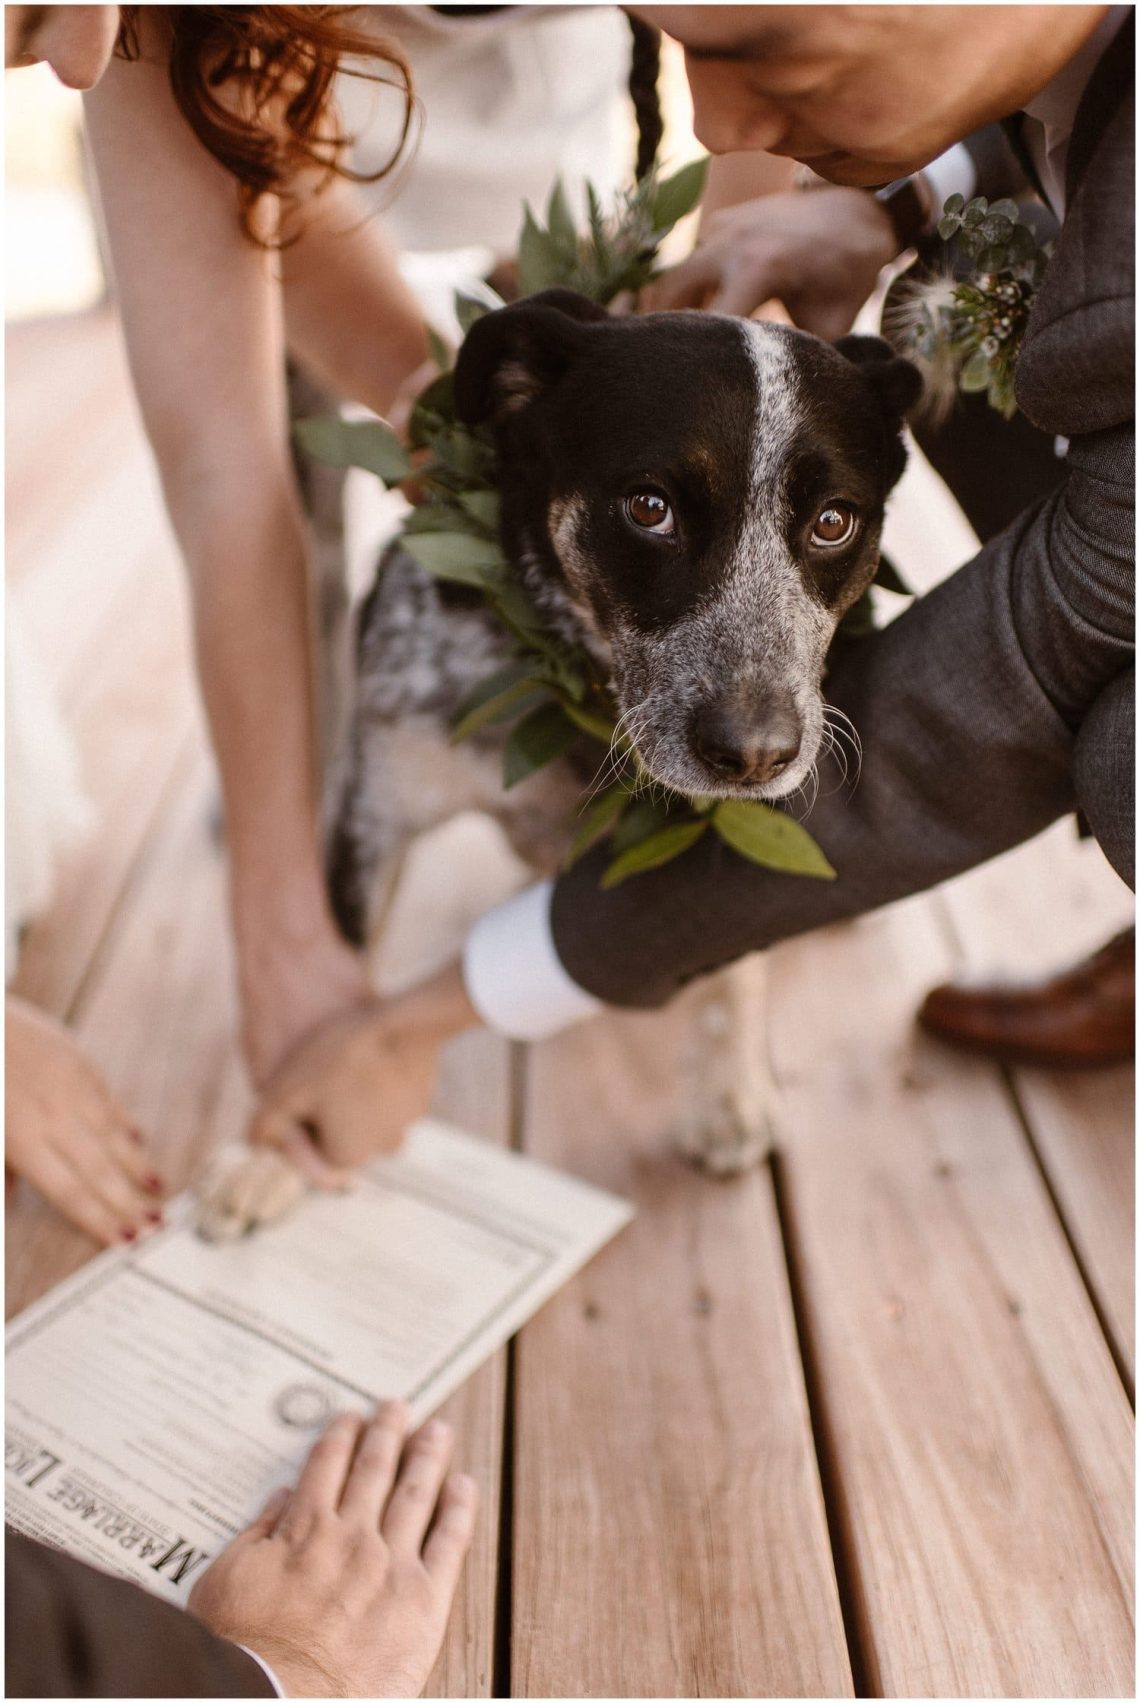 The most unusual wedding: the witnesses of the marriage were &#8230; shepherd dogs!